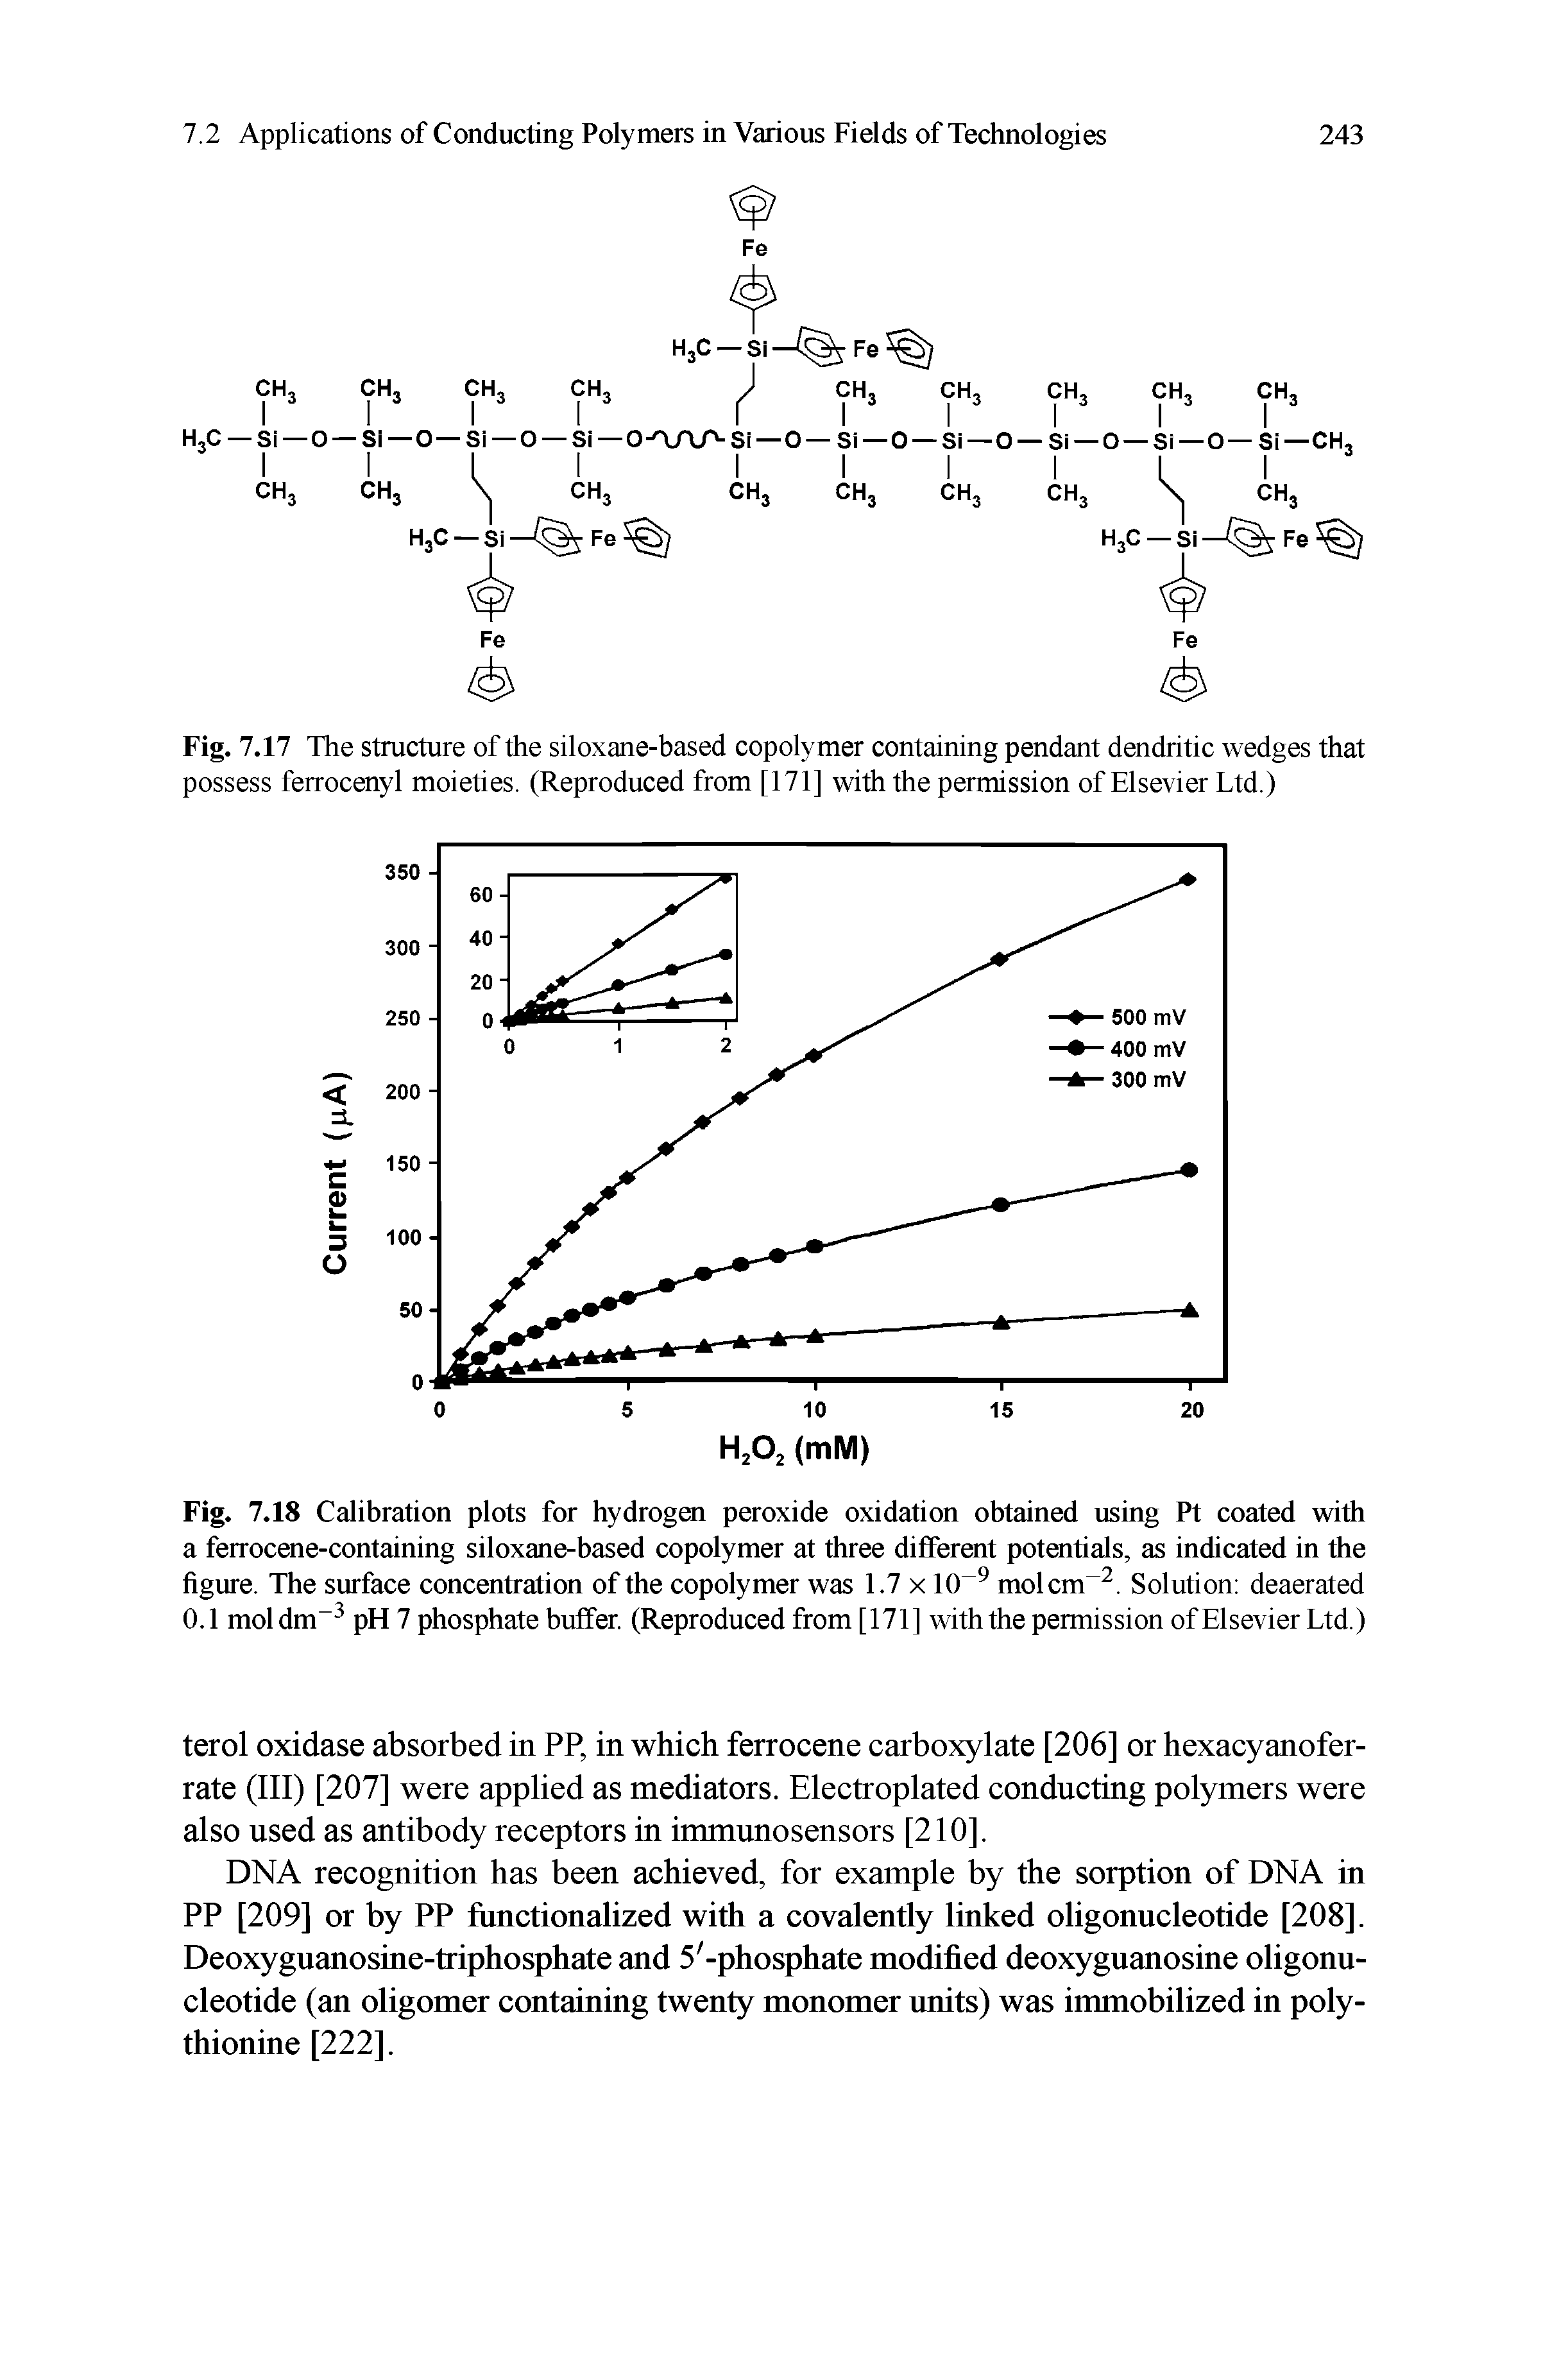 Fig. 7.18 Calibration plots for hydrogen peroxide oxidation obtained using Pt coated with a ferrocene-containing siloxane-based copolymer at three different potentials, as indicated in the figure. The surface concentration of the copolymer was 1.7 x 10 molcm . Solution deaerated 0.1 mol dm pH 7 phosphate buffer. (Reproduced from [171 ] with the permission of Elsevier Ltd.)...